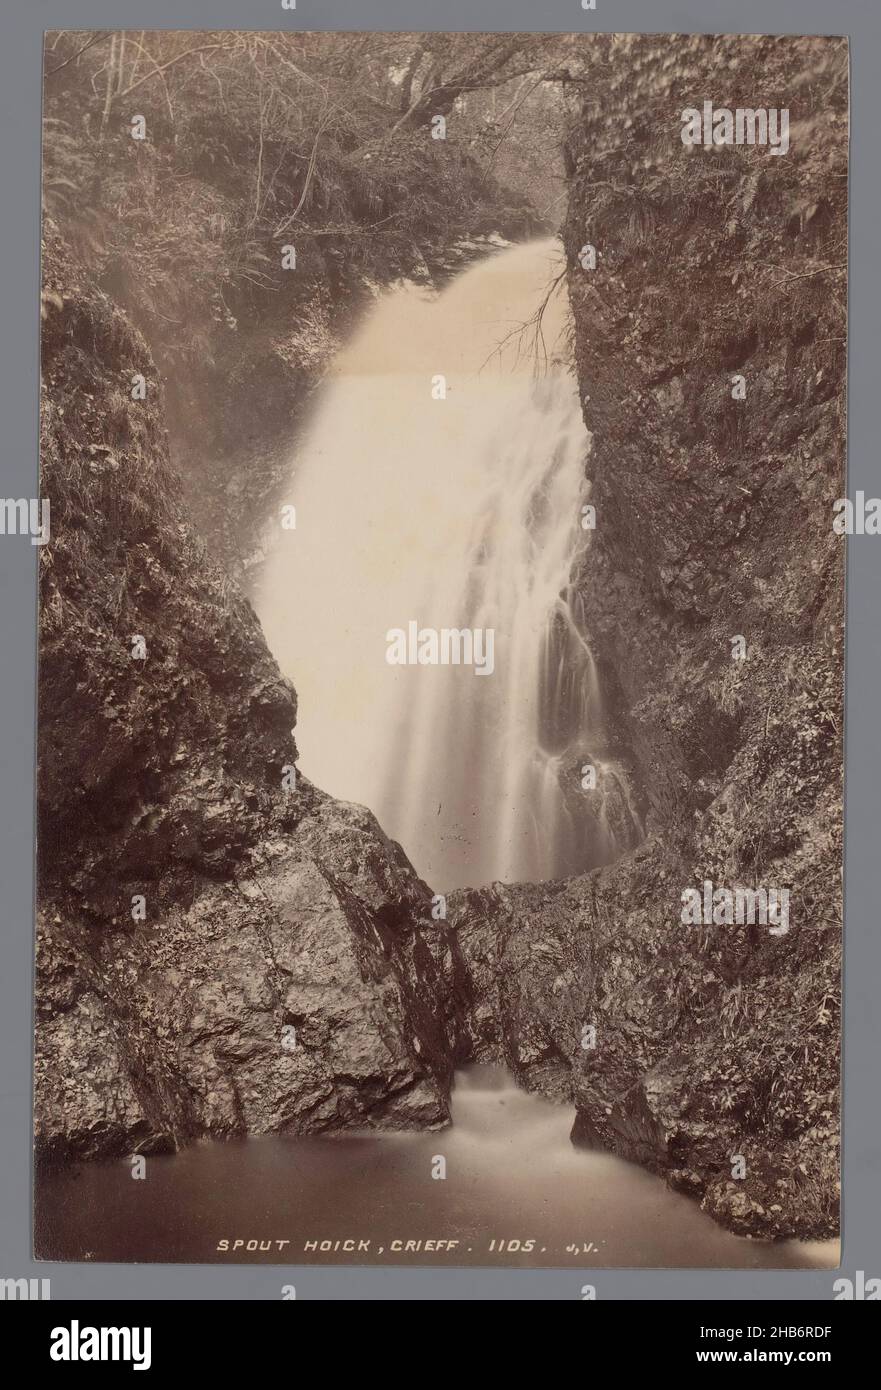 Waterfall with rocks and vegetation (Spout Hoick in Crieff, Scotland), Spout Hoick in the town of Crieff, Scotland. Waterfall with rocks and vegetation., James Valentine, c. 1860 - c. 1880, photographic support, albumen print, height 203 mm × width 132 mm Stock Photo